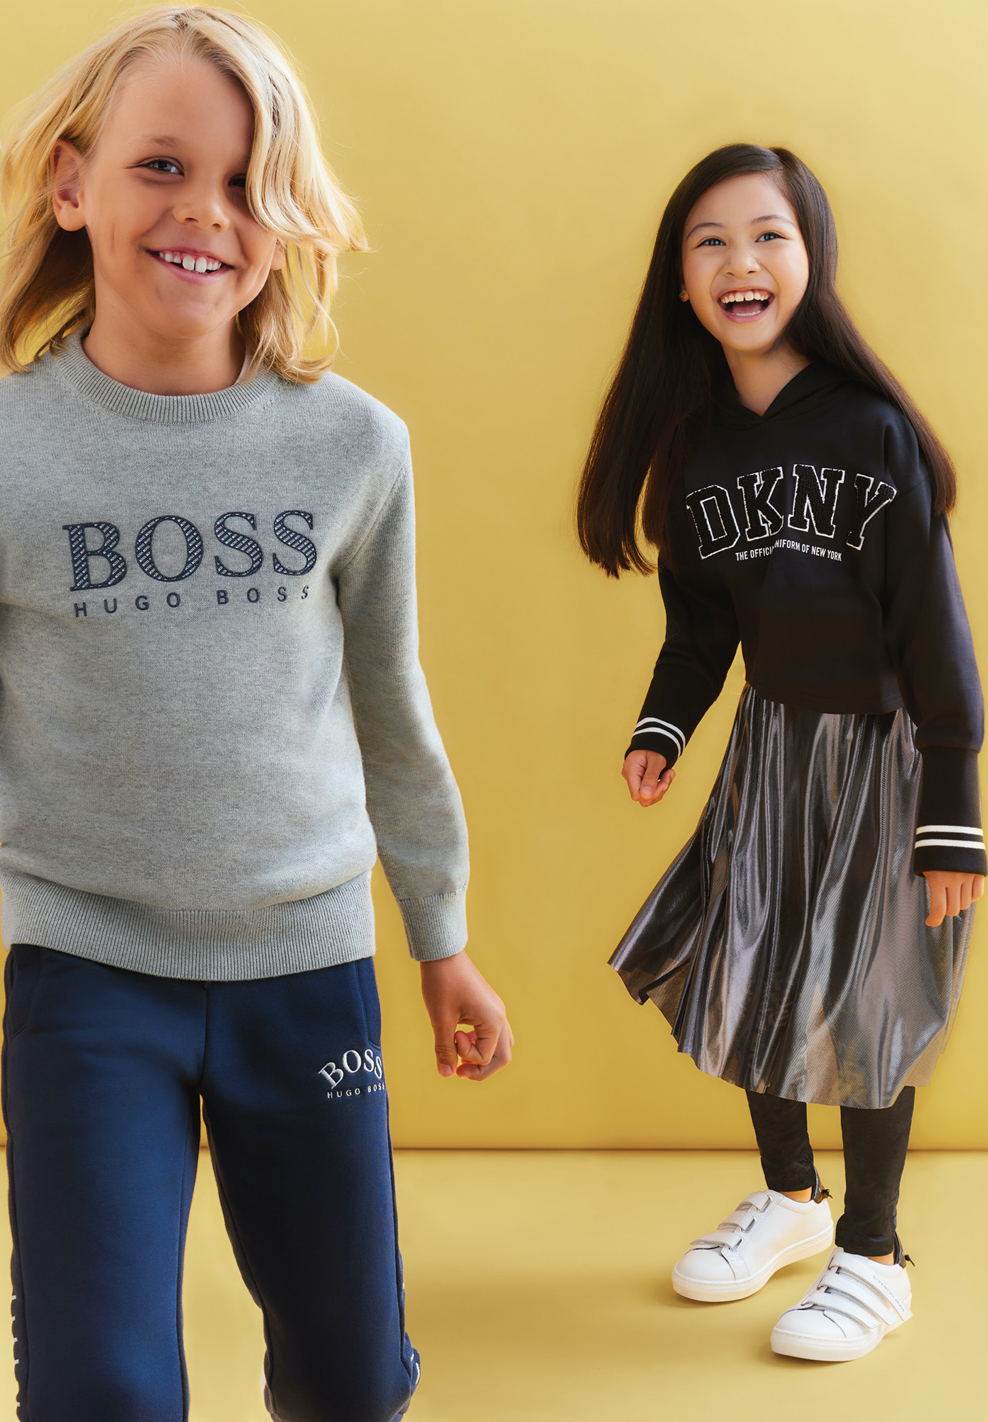 The Best Autumn Fashion for Kids - JONES - The home of fashion, culture ...